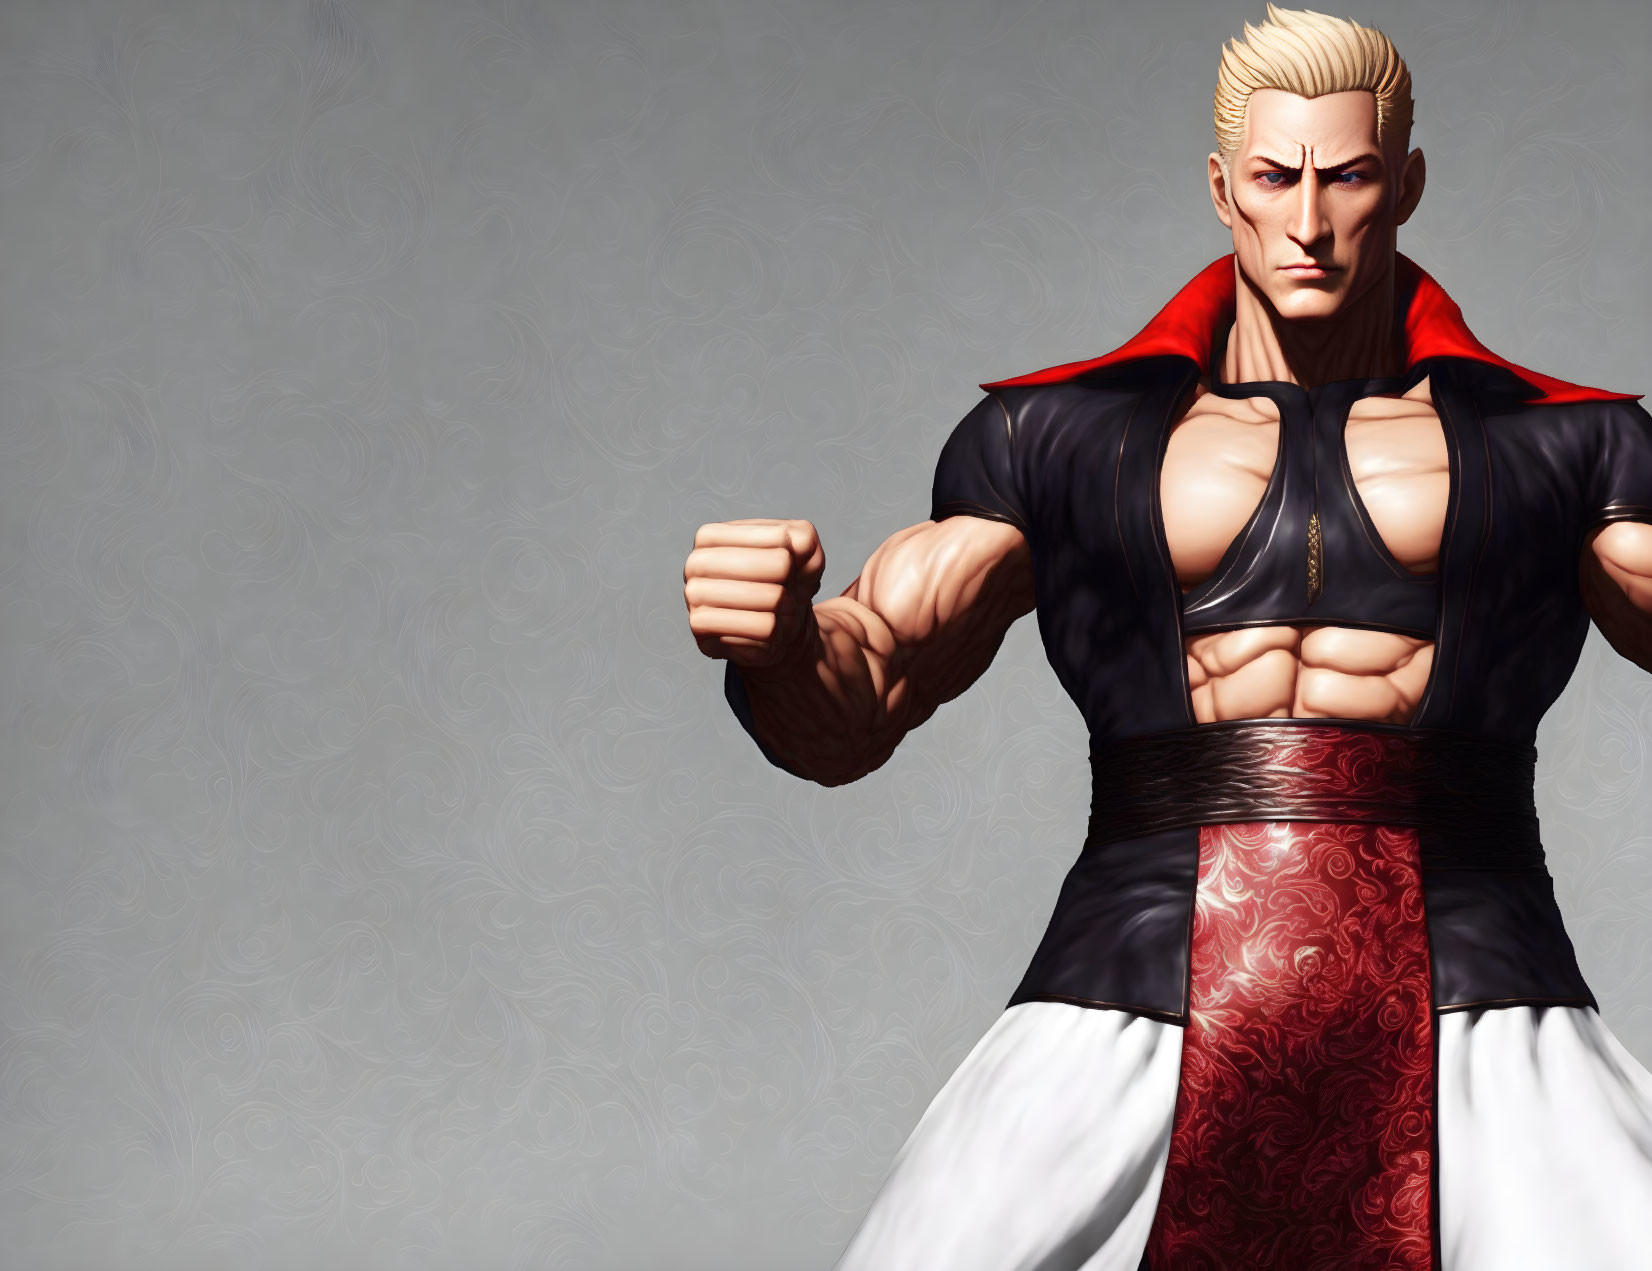 Blond Muscular Animated Character in Black and Red Vest